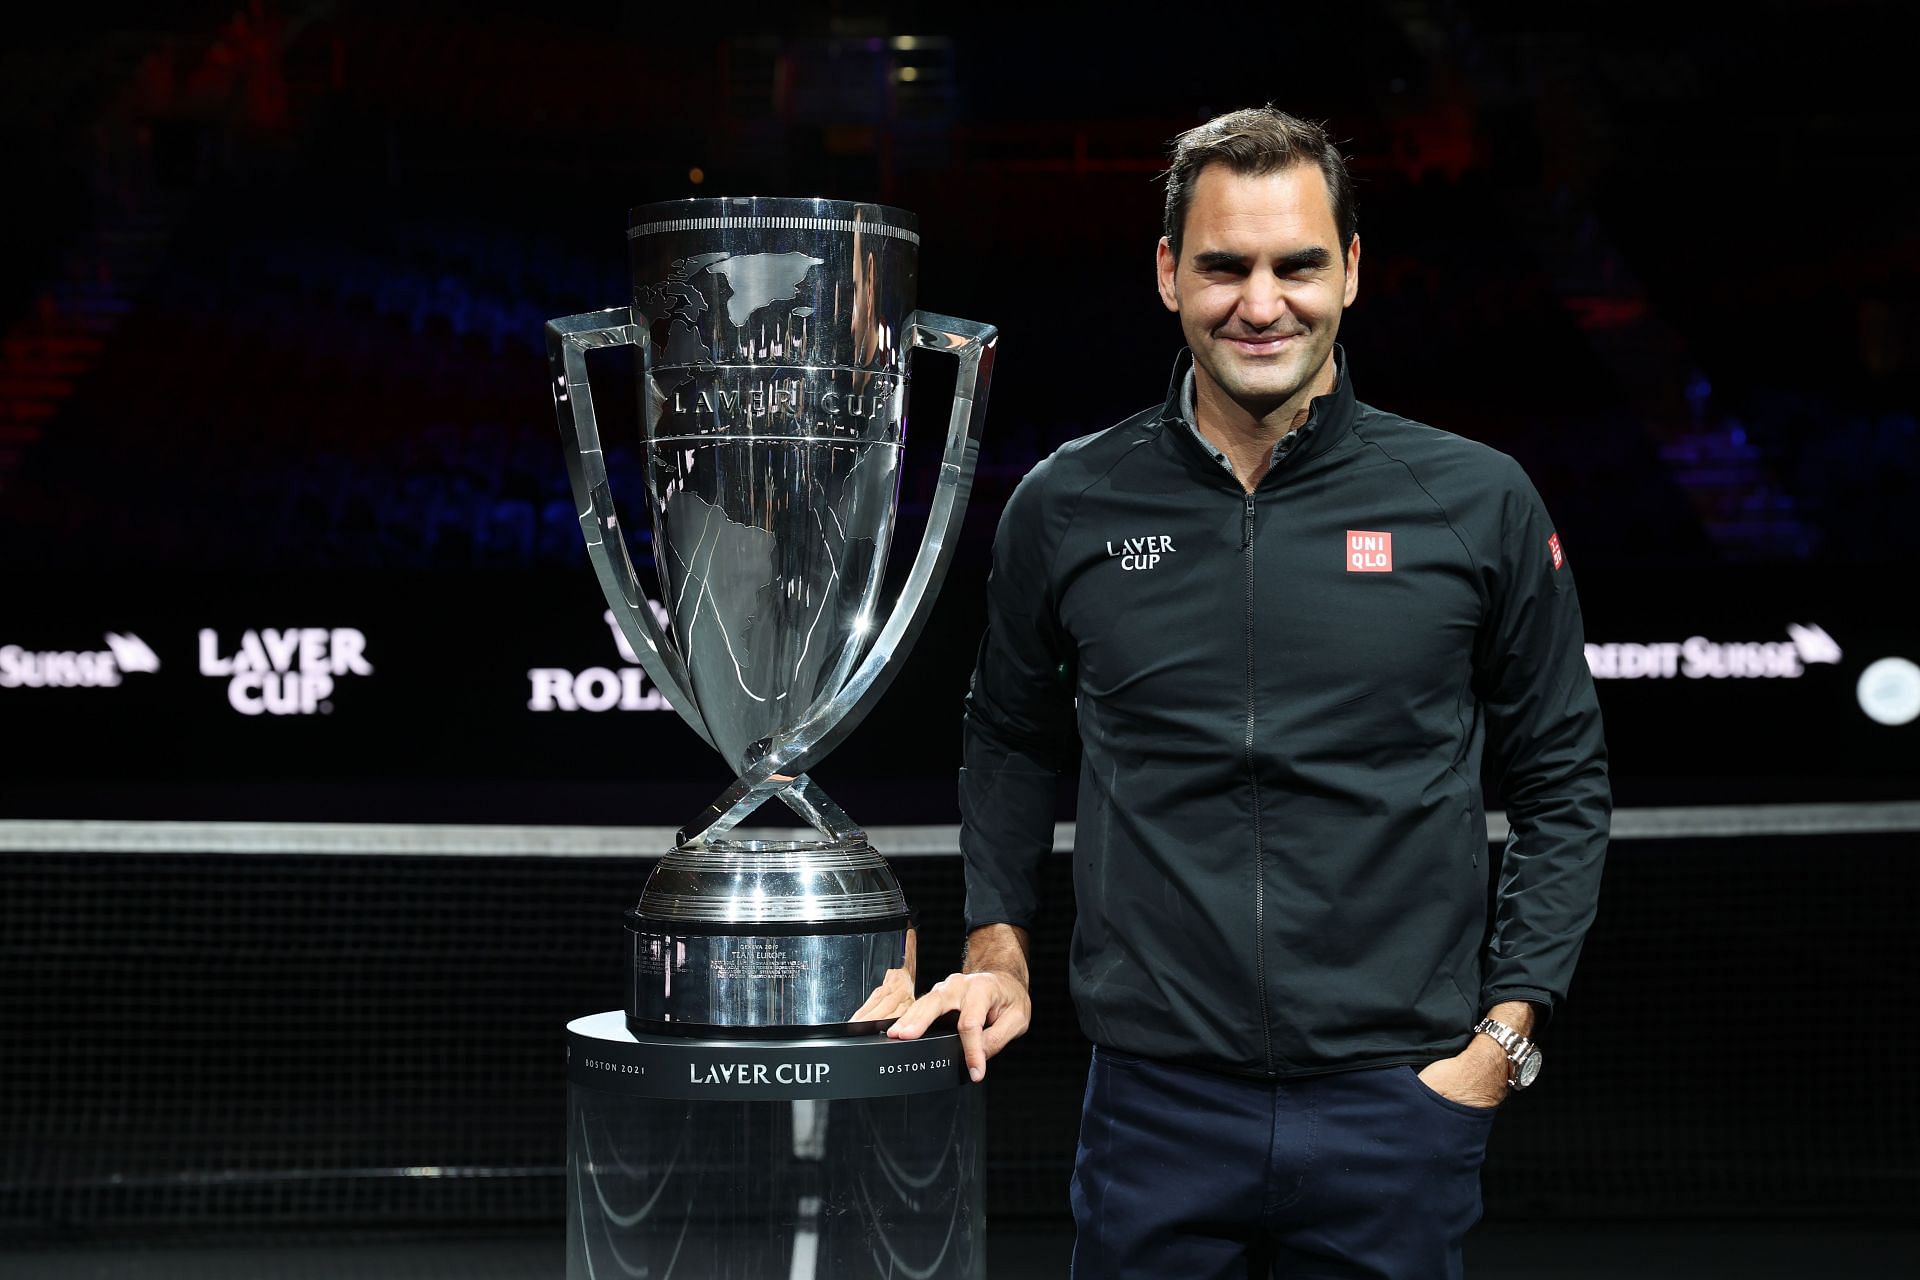 Roger Federer said he hopes to return to action at the Laver Cup later this year